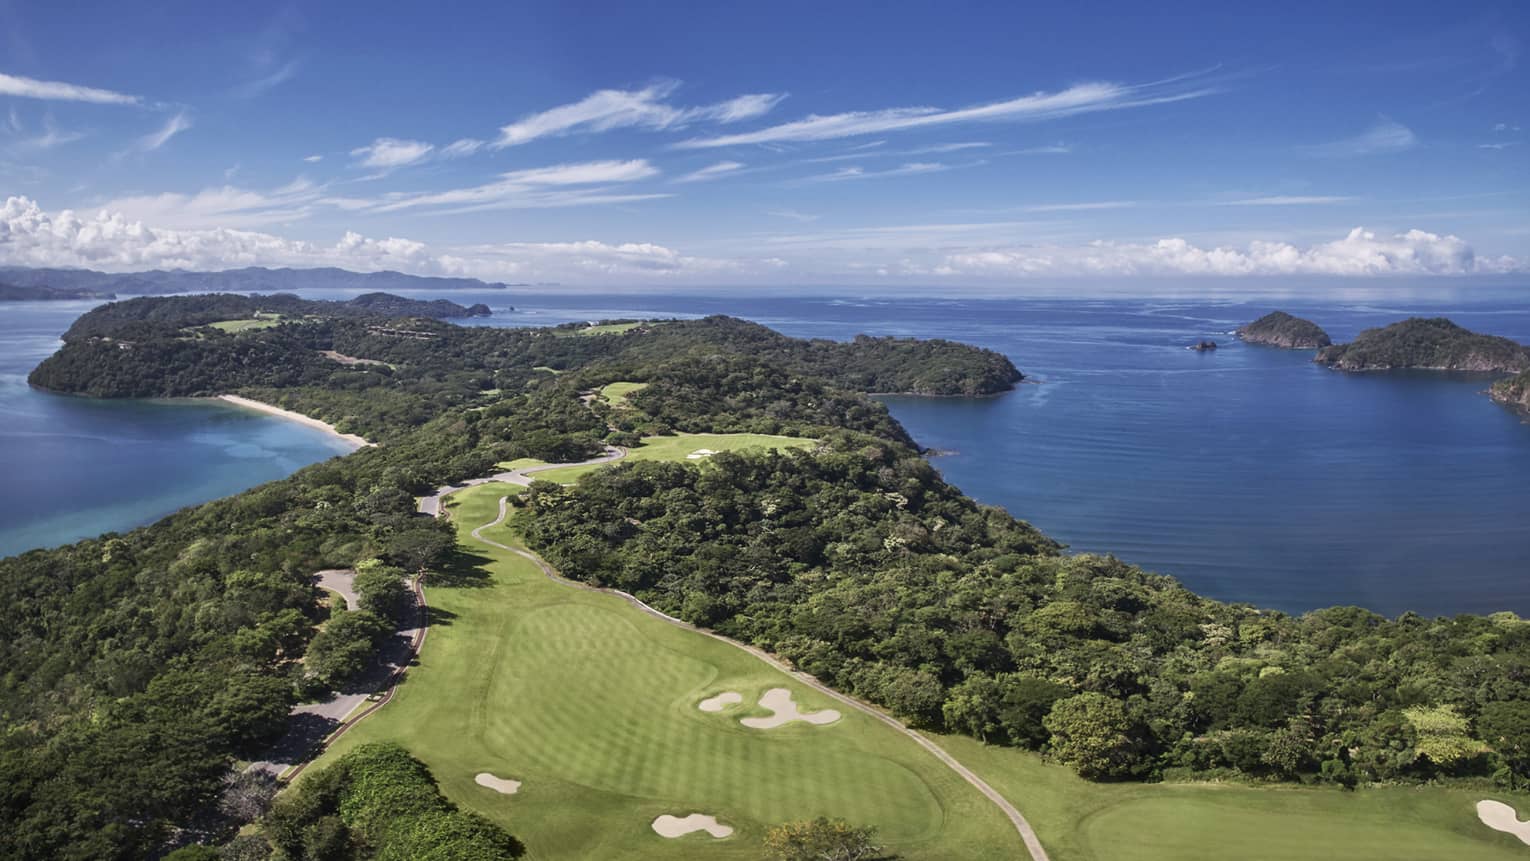 Aerial view of a golf course that stretches along a verdant peninsula by the sea